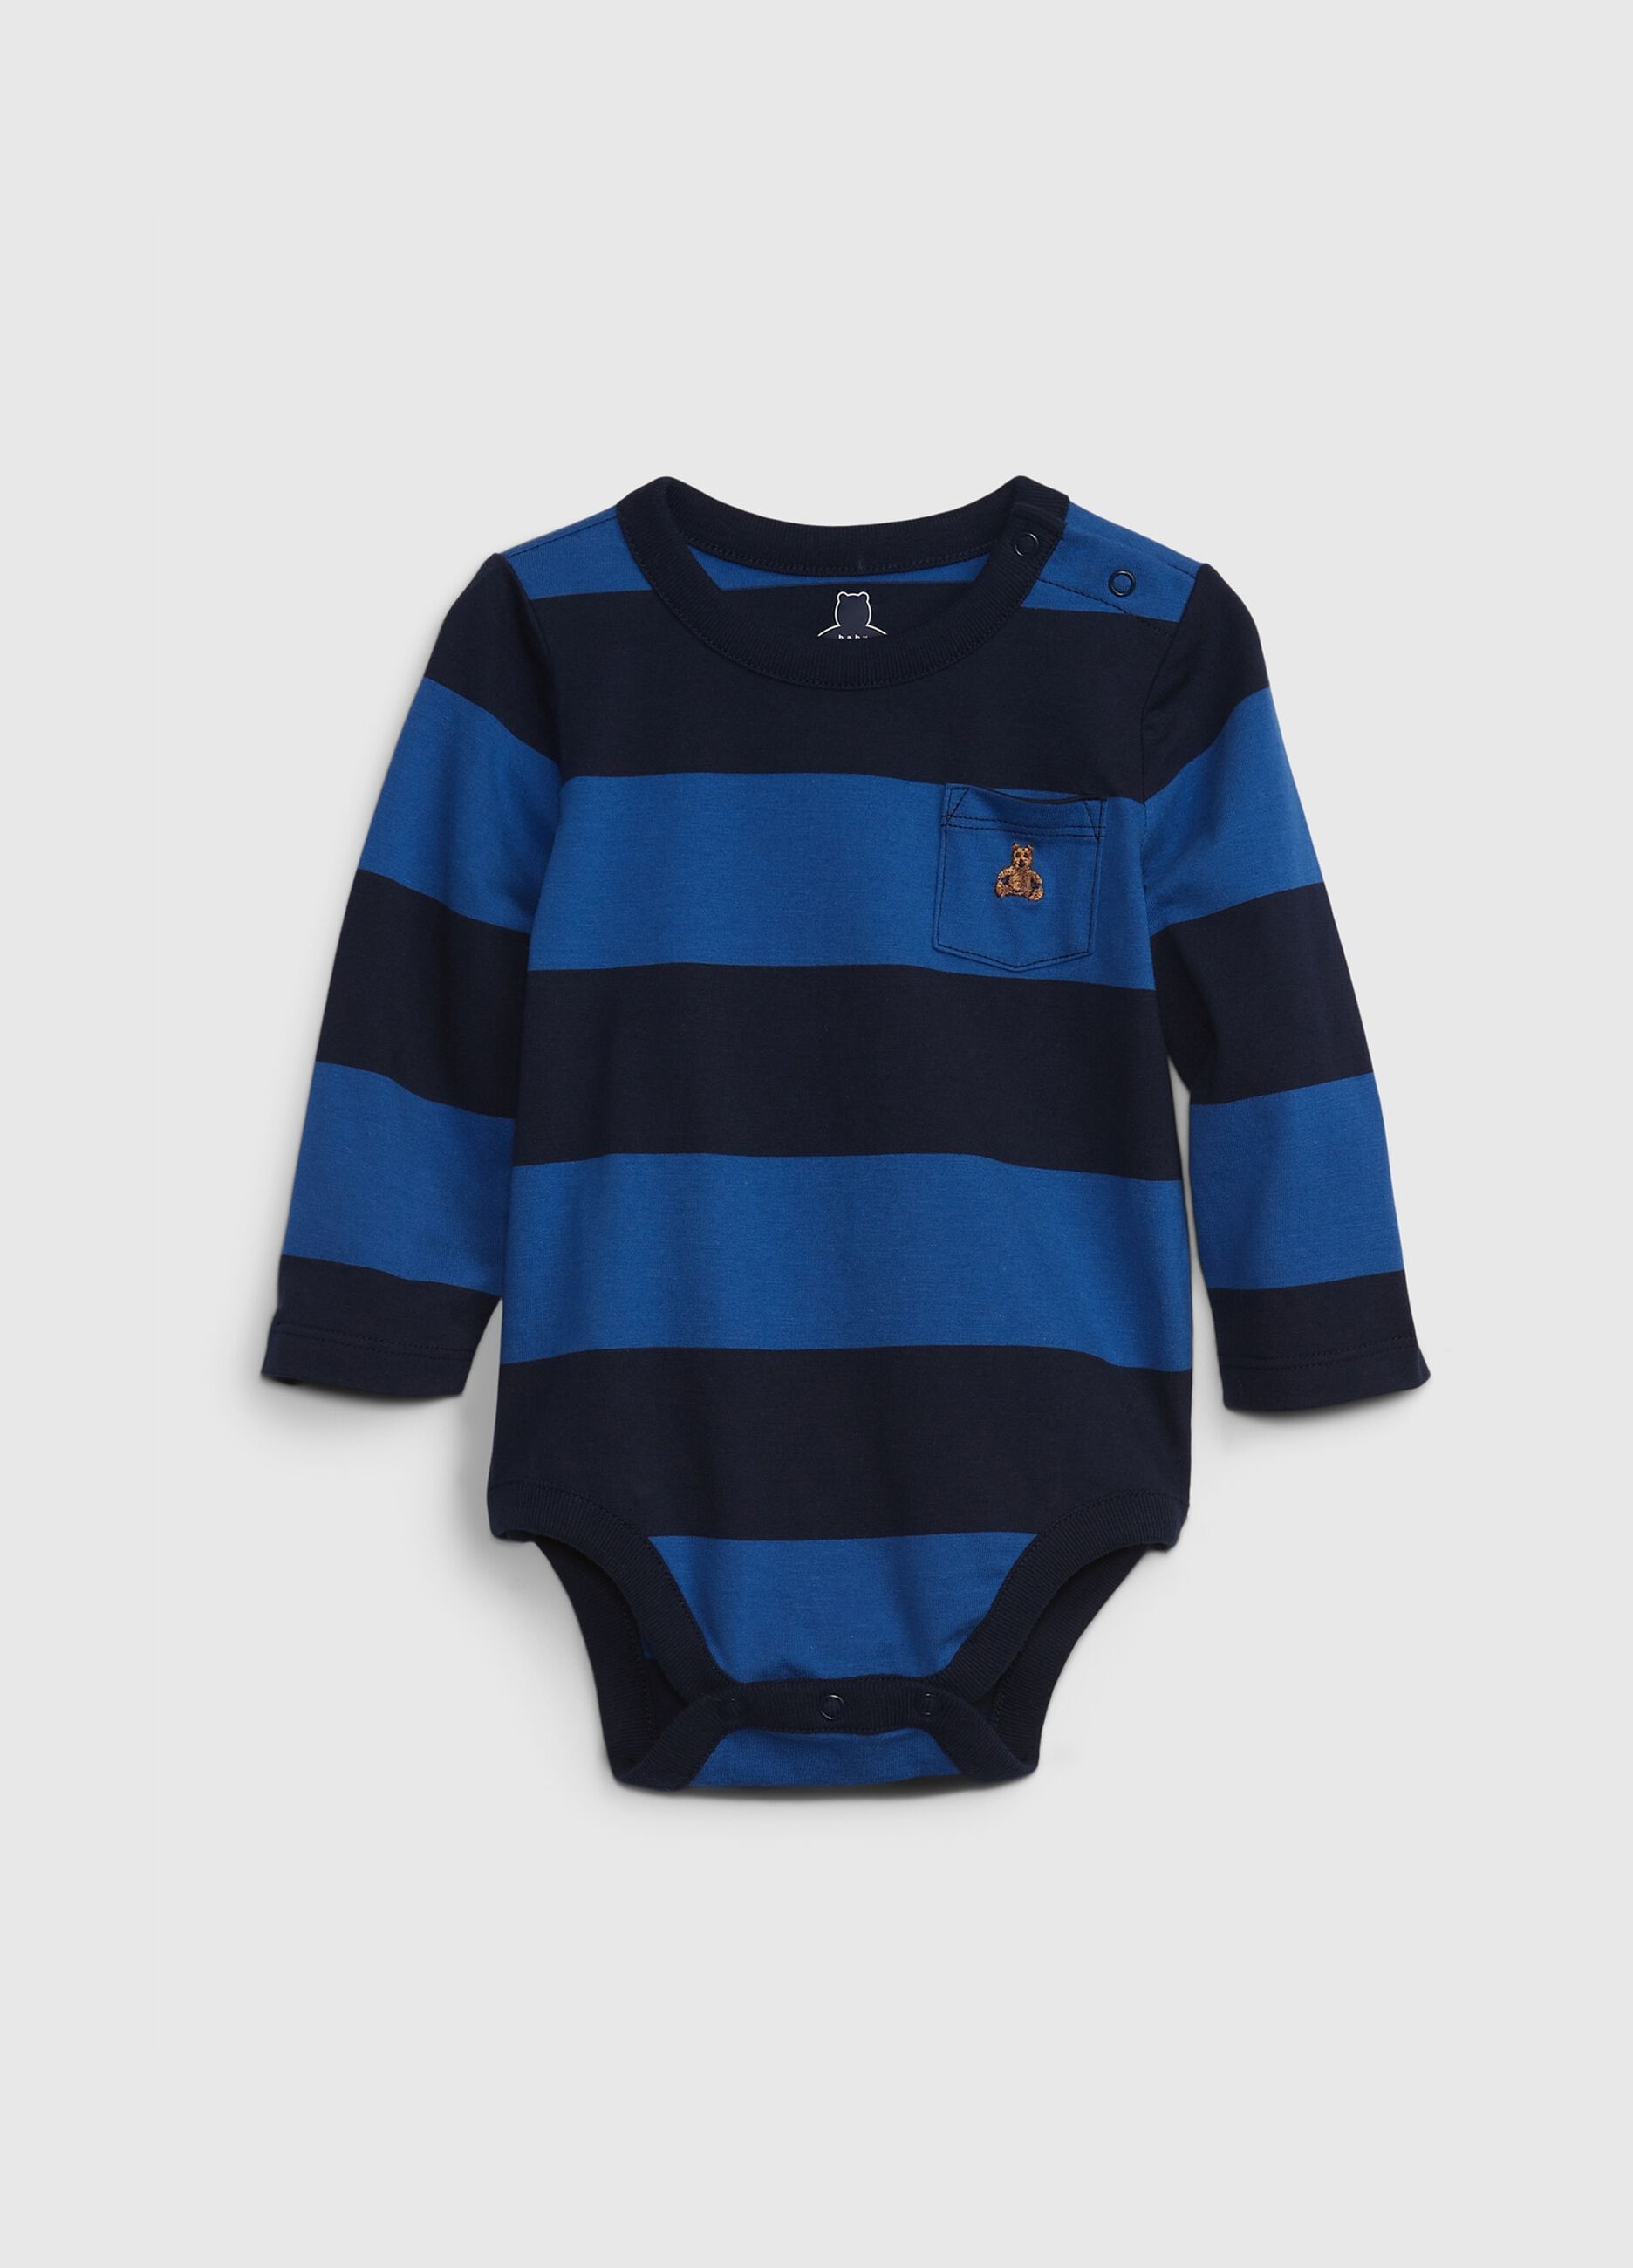 Striped bodysuit with teddy bear embroidery